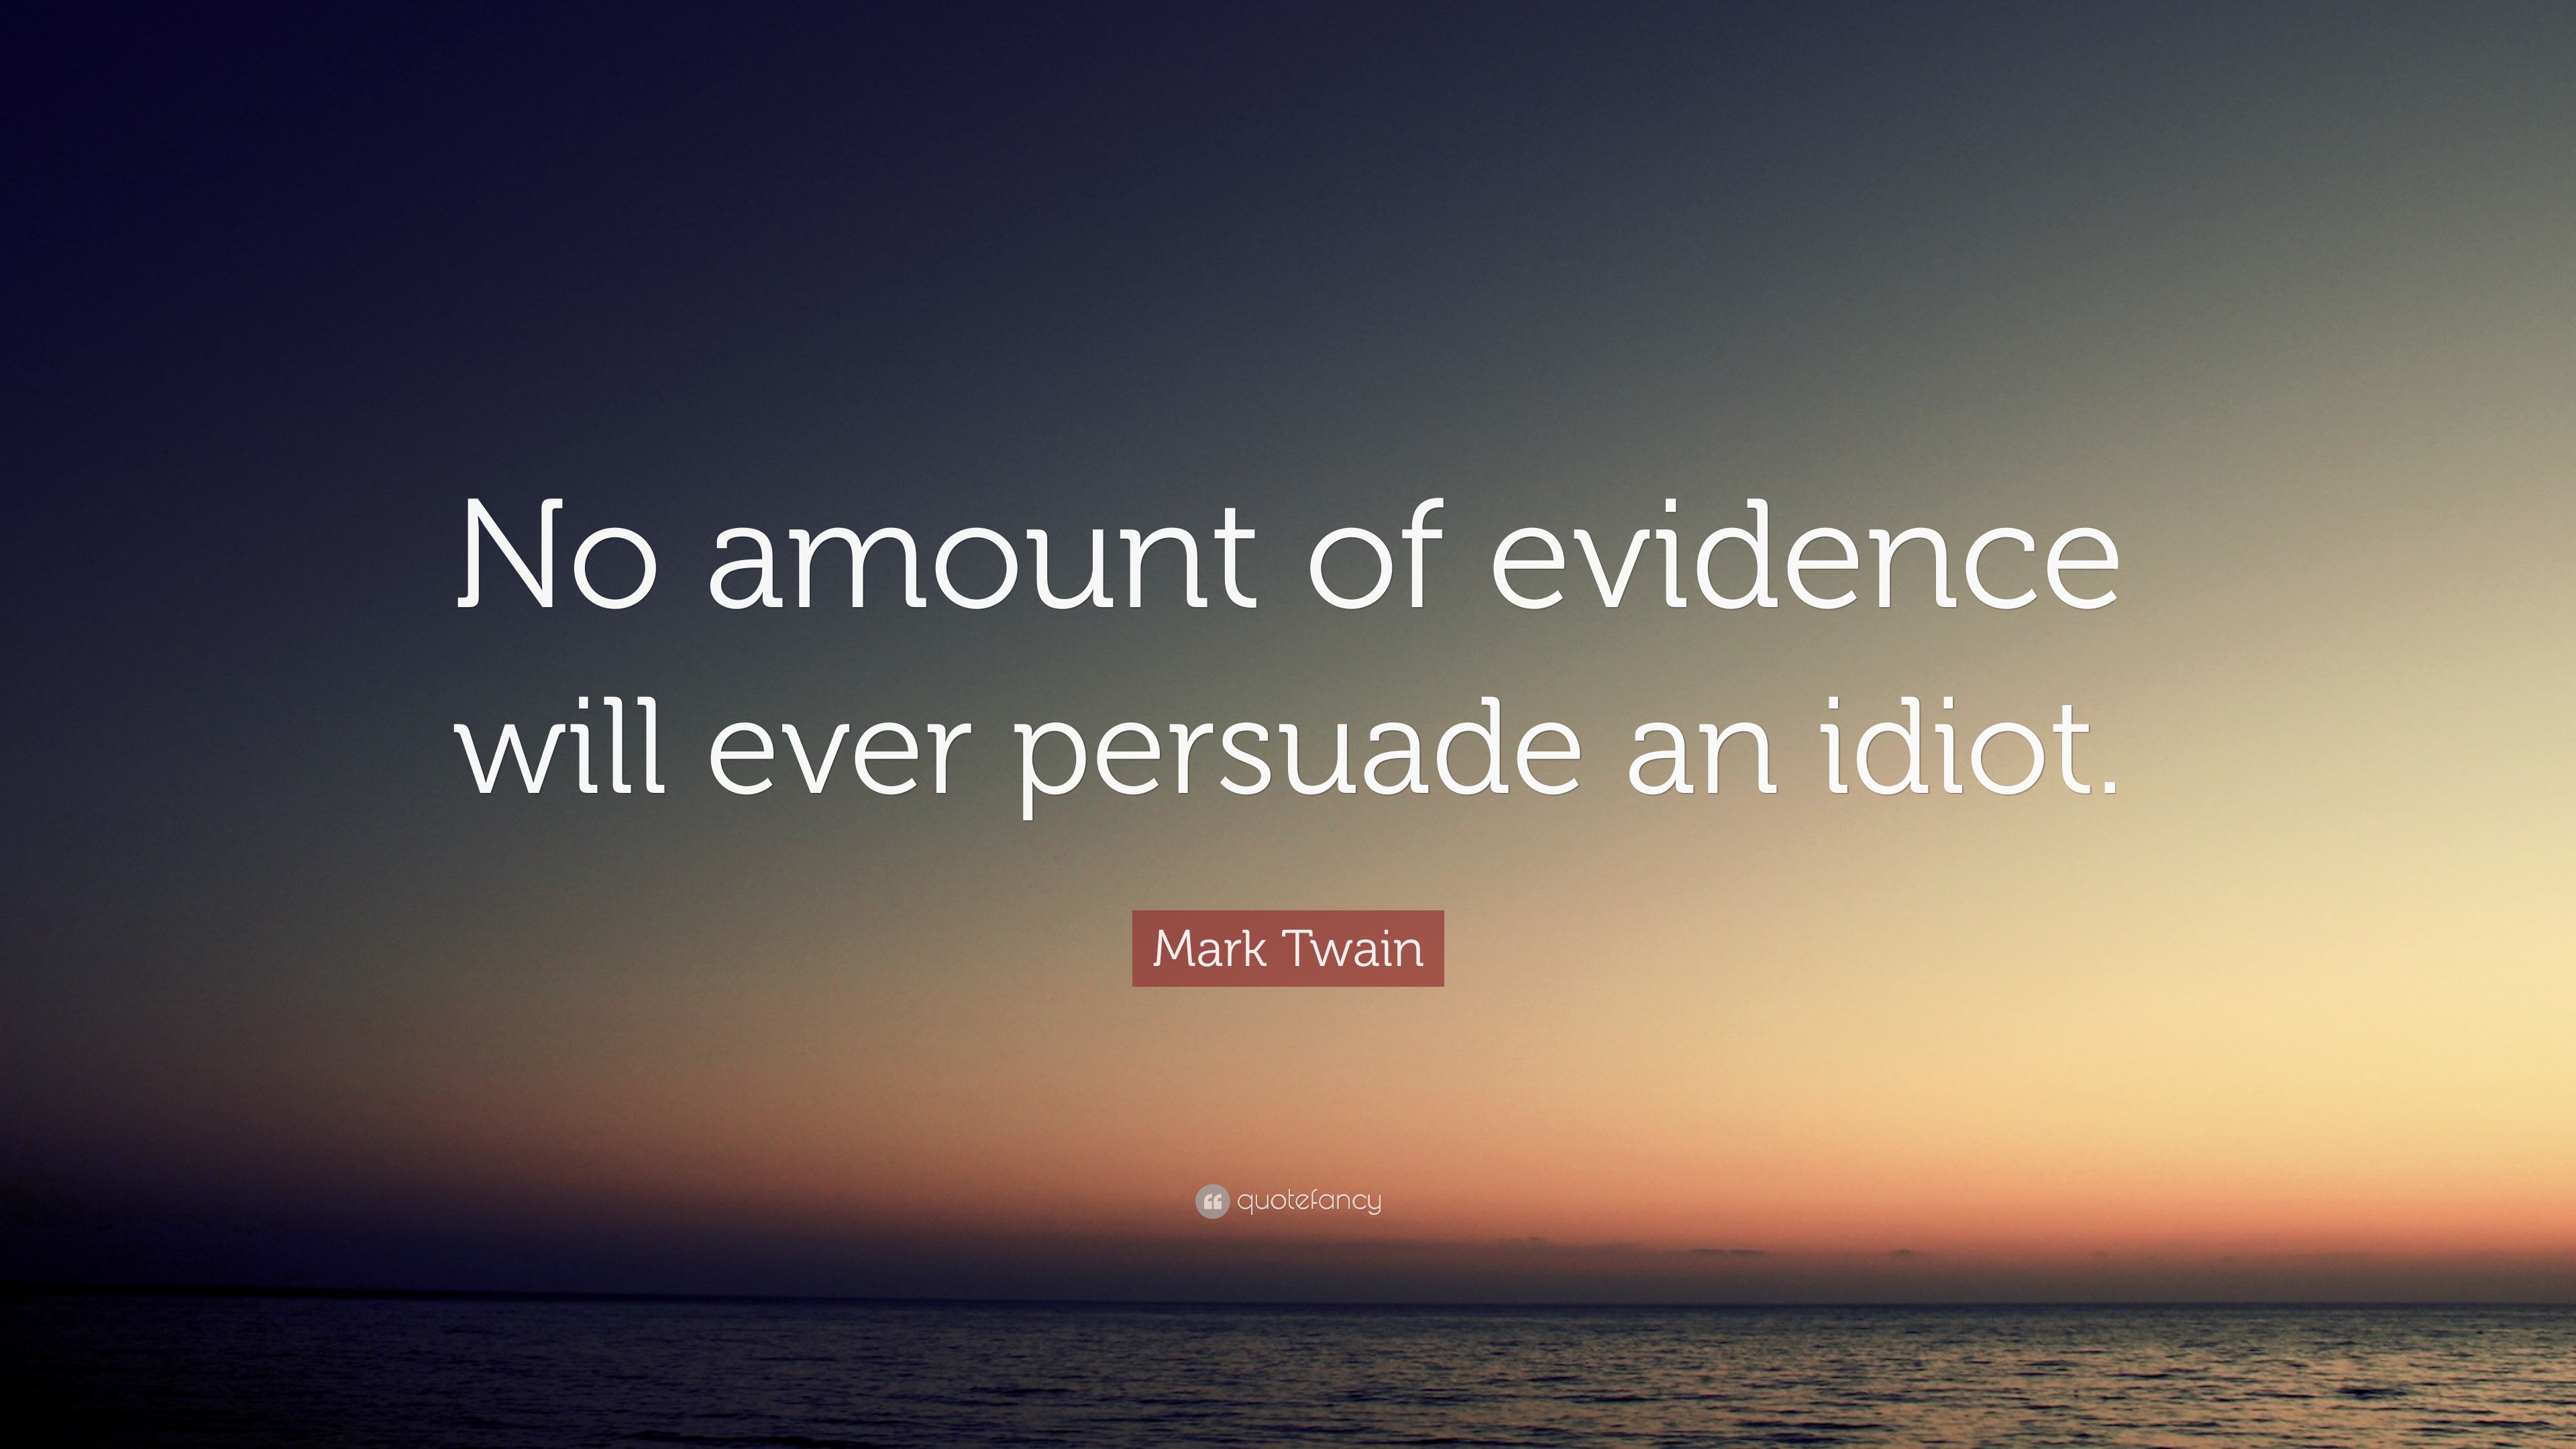 Mark Twain Quote: “No amount of evidence will ever persuade an idiot.”